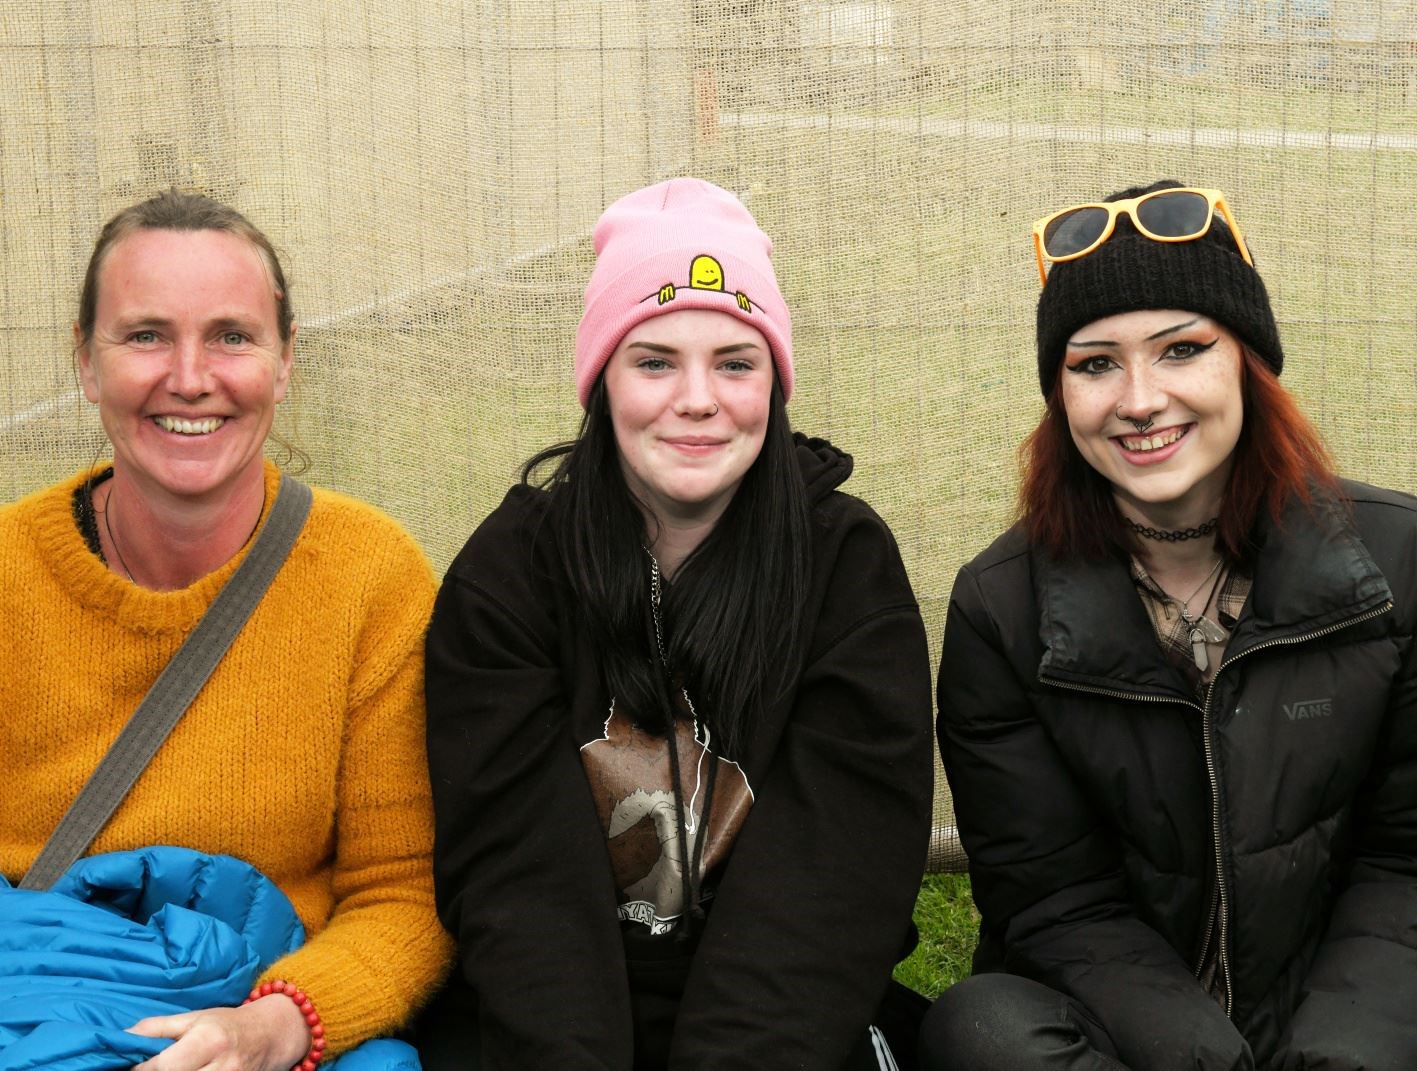 The Gathering Festival in the Northern Meeting Park 2022: Tasha Fyffe, Mia Lancaster and Tia Knowles. Picture: James Mackenzie.